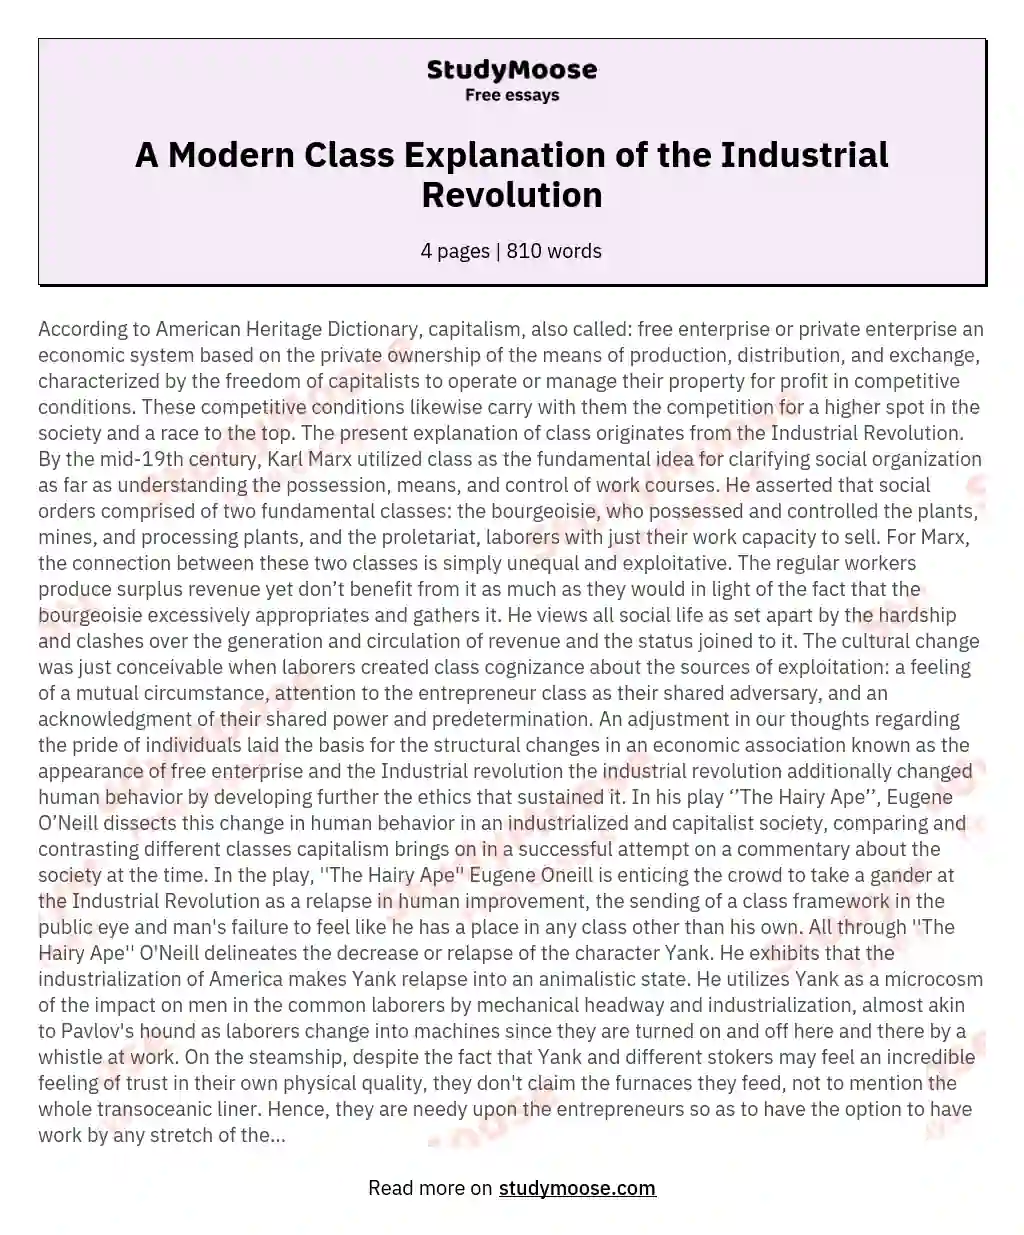 A Modern Class Explanation of the Industrial Revolution essay